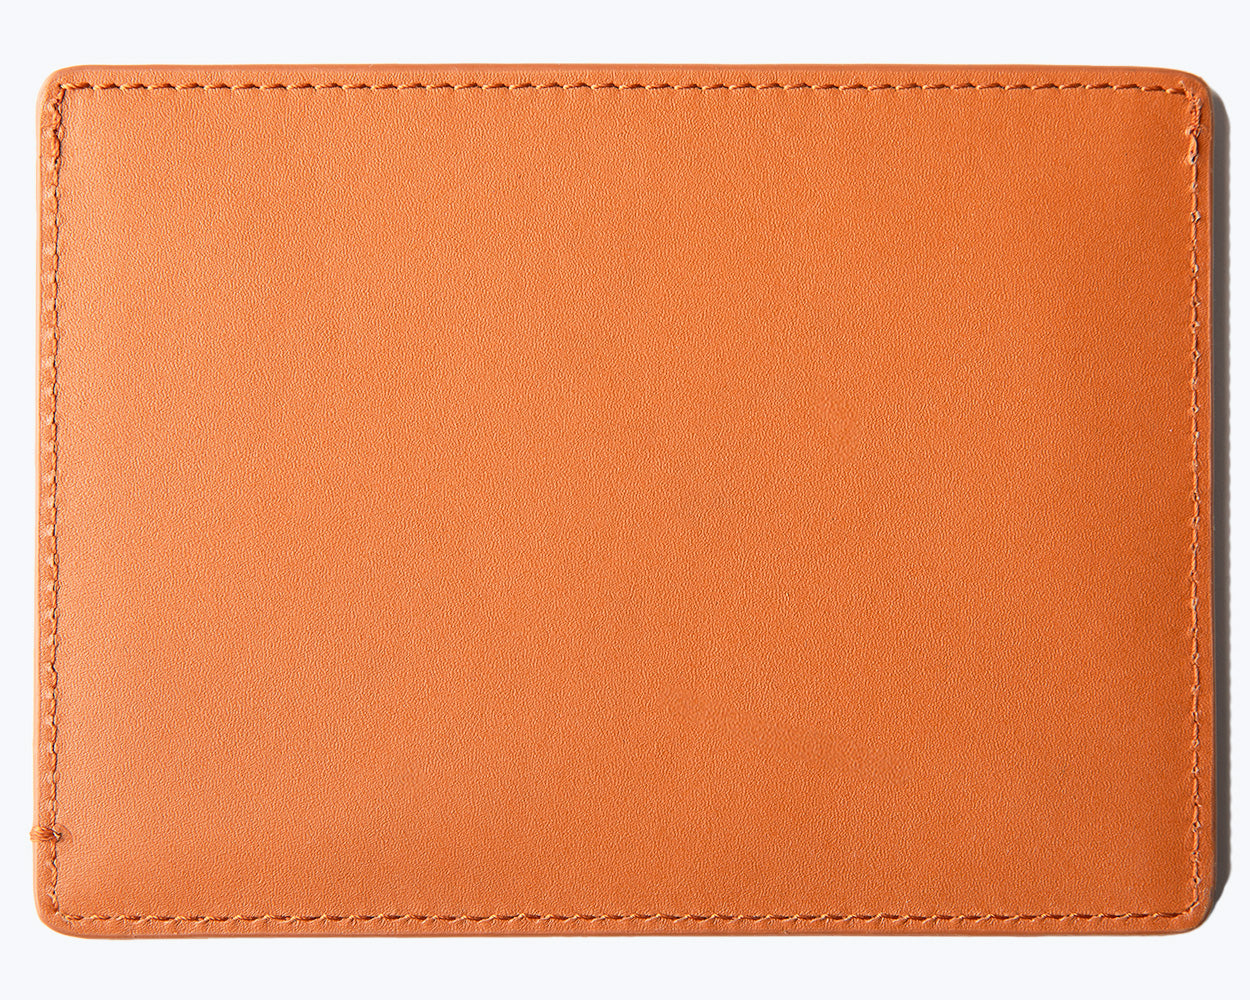 LEATHER PASSPORT HOLDER - THE ESSENTIAL COLLECTION